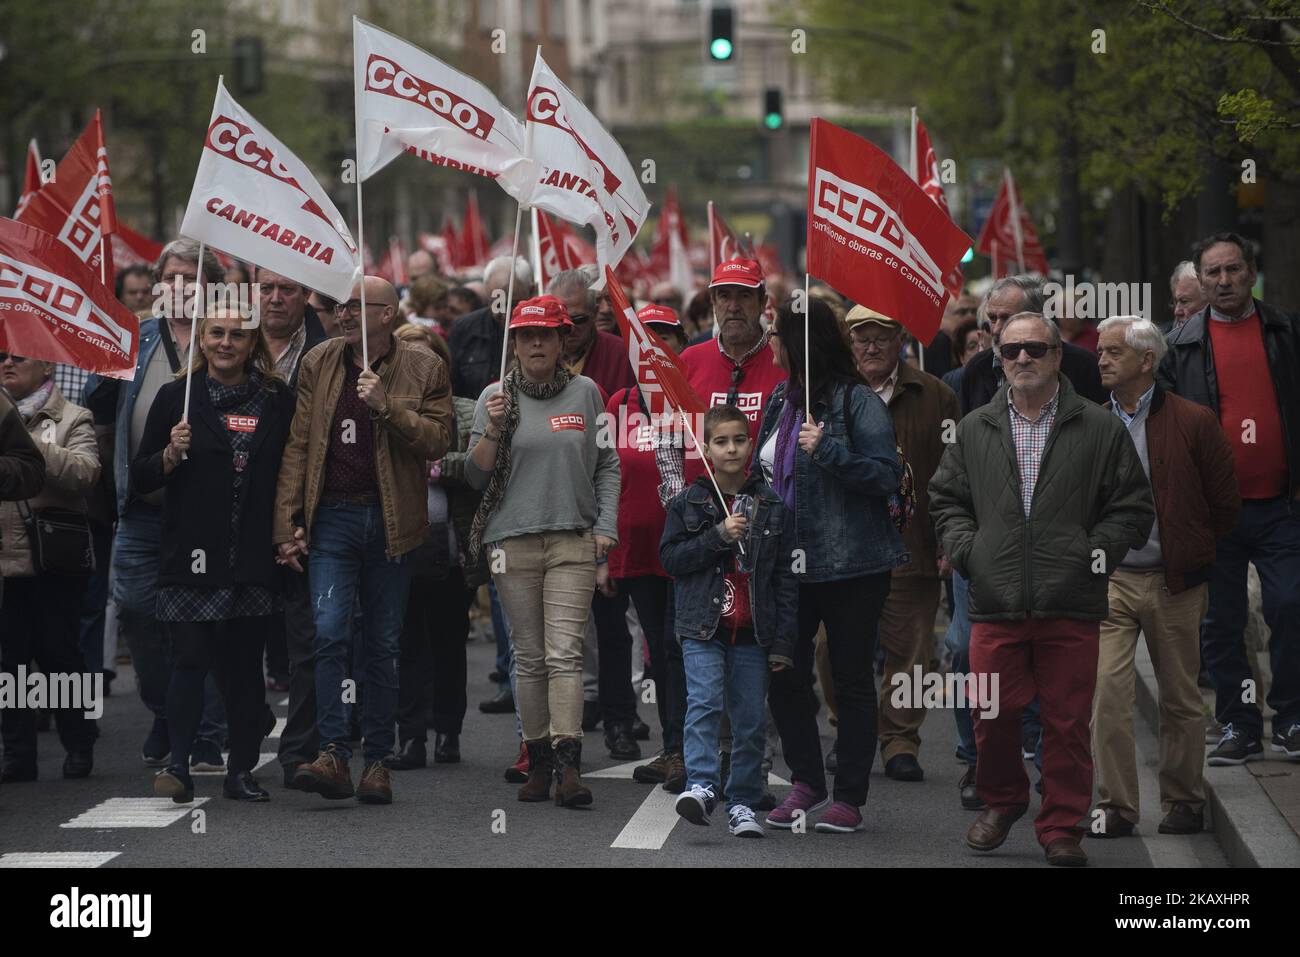 The majority unions (UGT and CCOO) called a demonstration at the national level to claim decent pensions in Santander, Spain, on April 15, 2018. More than a thousand people have supported this Sunday, protest and demonstration called by the federations of retirees and pensioners of UGT and CCOO in Cantabria in defense of 'decent public pensions.' The march is the second one since last year when unions began the mobilizations for a 'decent pensions' between the Plaza Numancia and the Pereda Gardens. (Photo by Joaquin Gomez Sastre/NurPhoto) Stock Photo